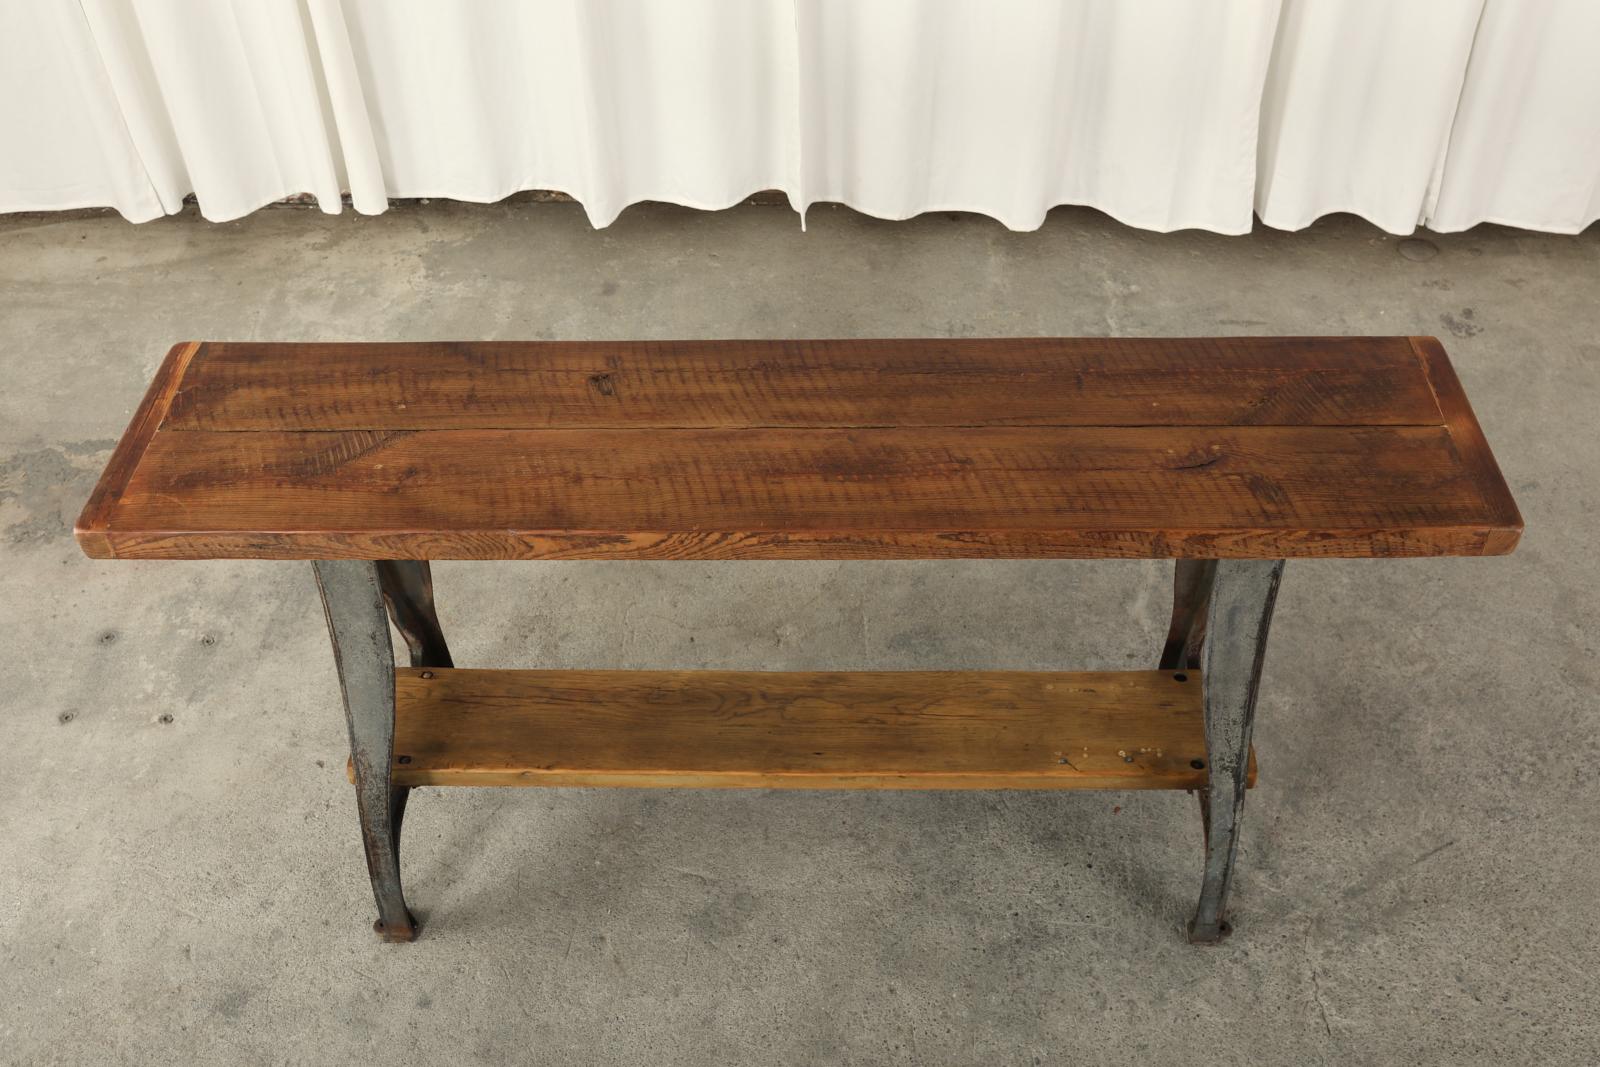 Hand-Crafted Industrial Style Cast Iron Leg Trestle Console Table